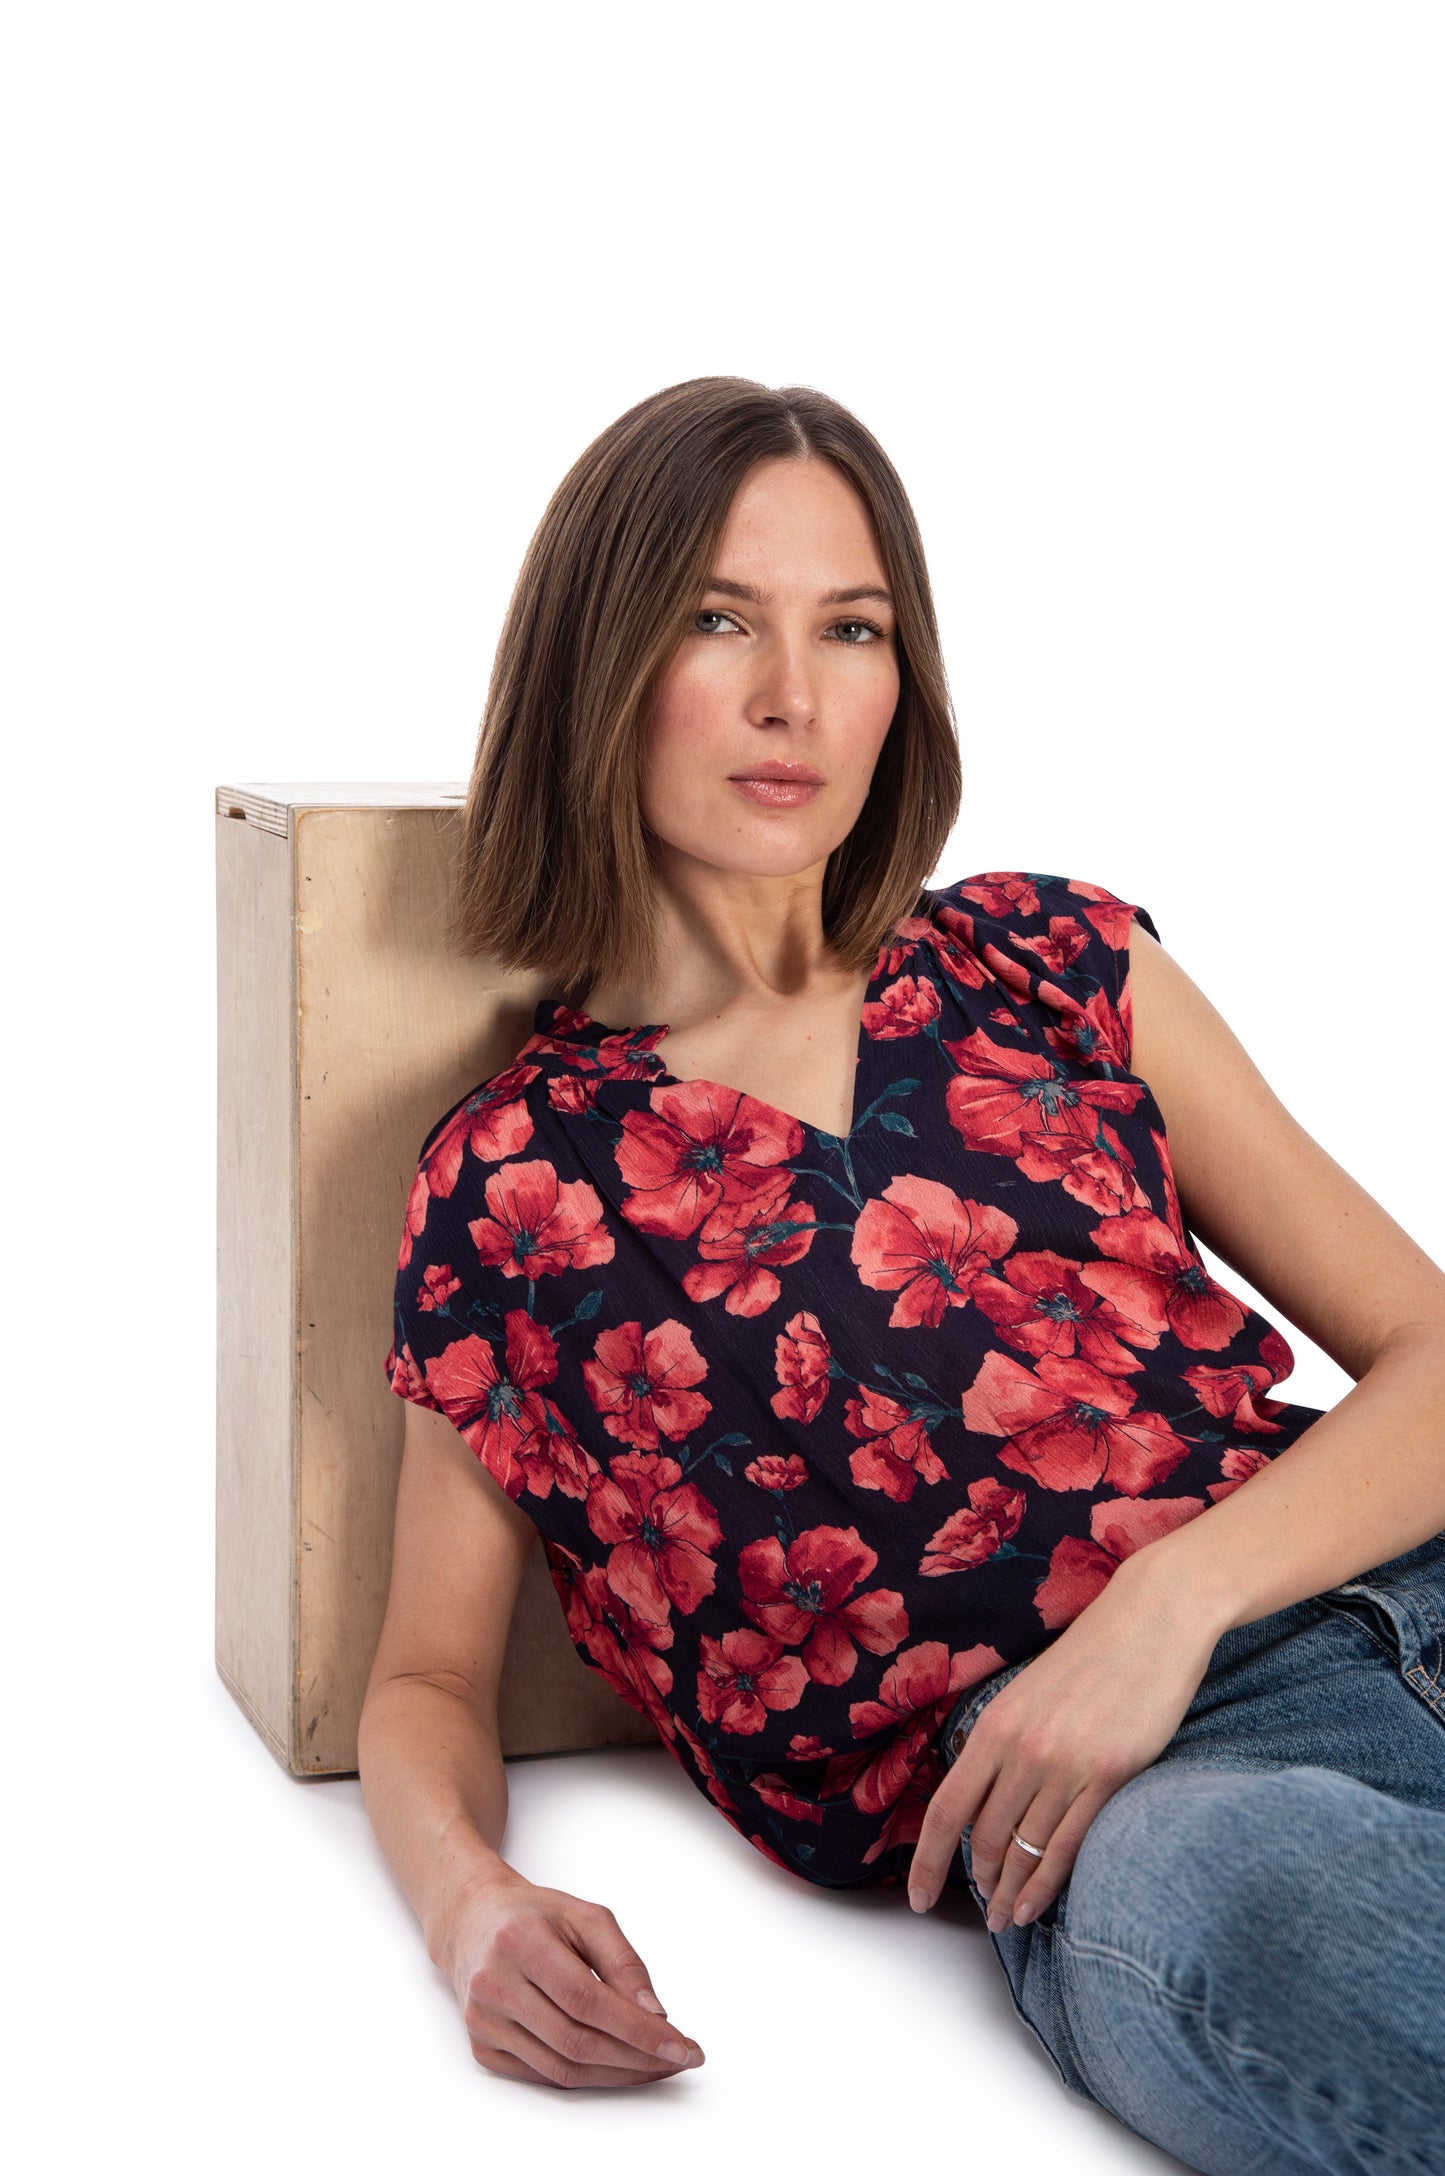 A woman in a short sleeve, floral blouse with a B Collection by Bobeau Ruffle Neck Top and jeans sitting casually next to a wooden box against a white background.